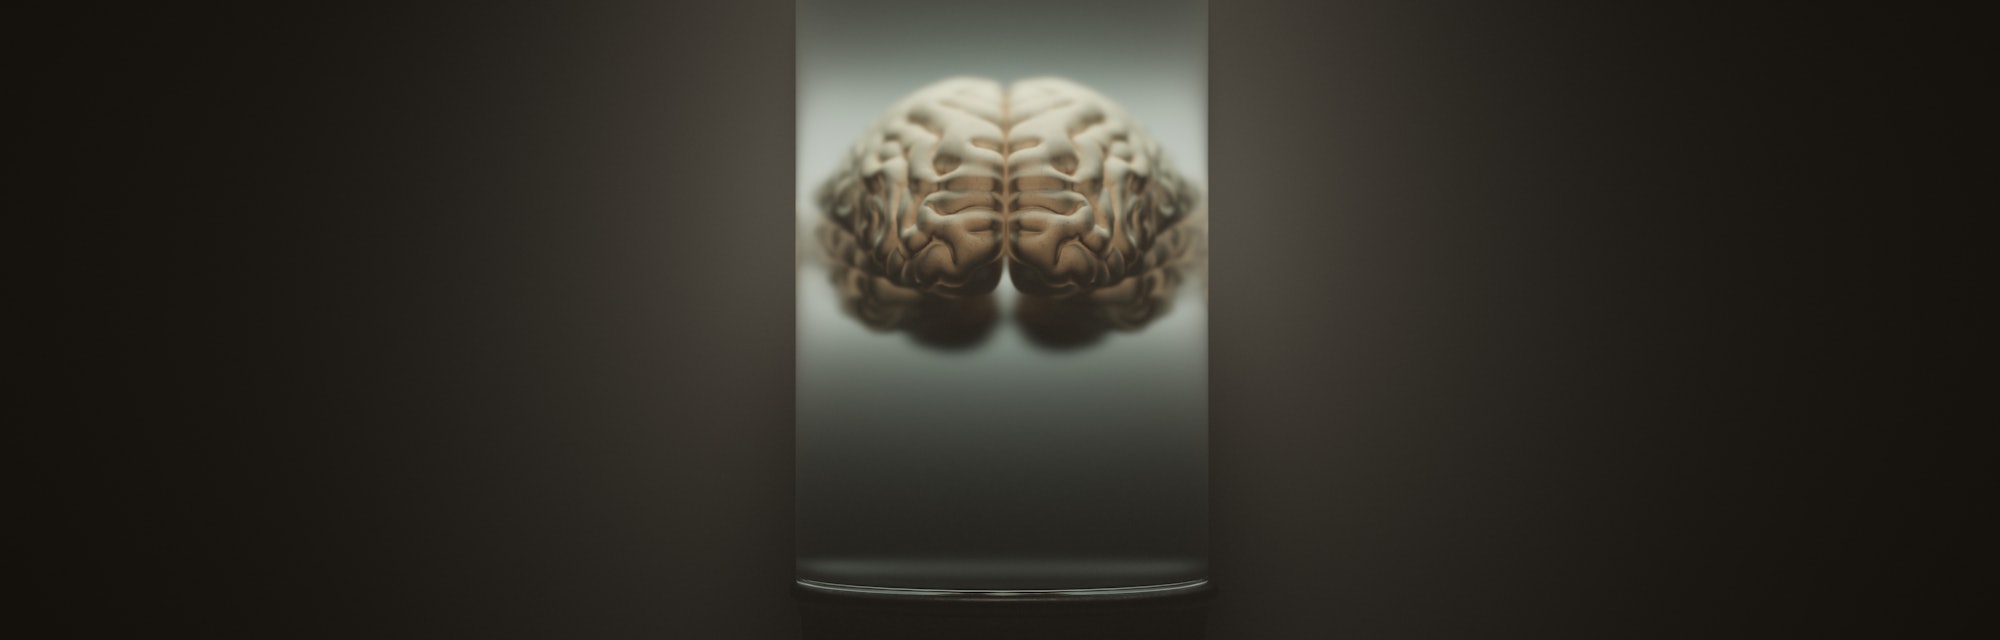 Human Brain Floating in a Liquid in a Bell Jar with a Dark Foggy Background 3d illustration 3d rende...